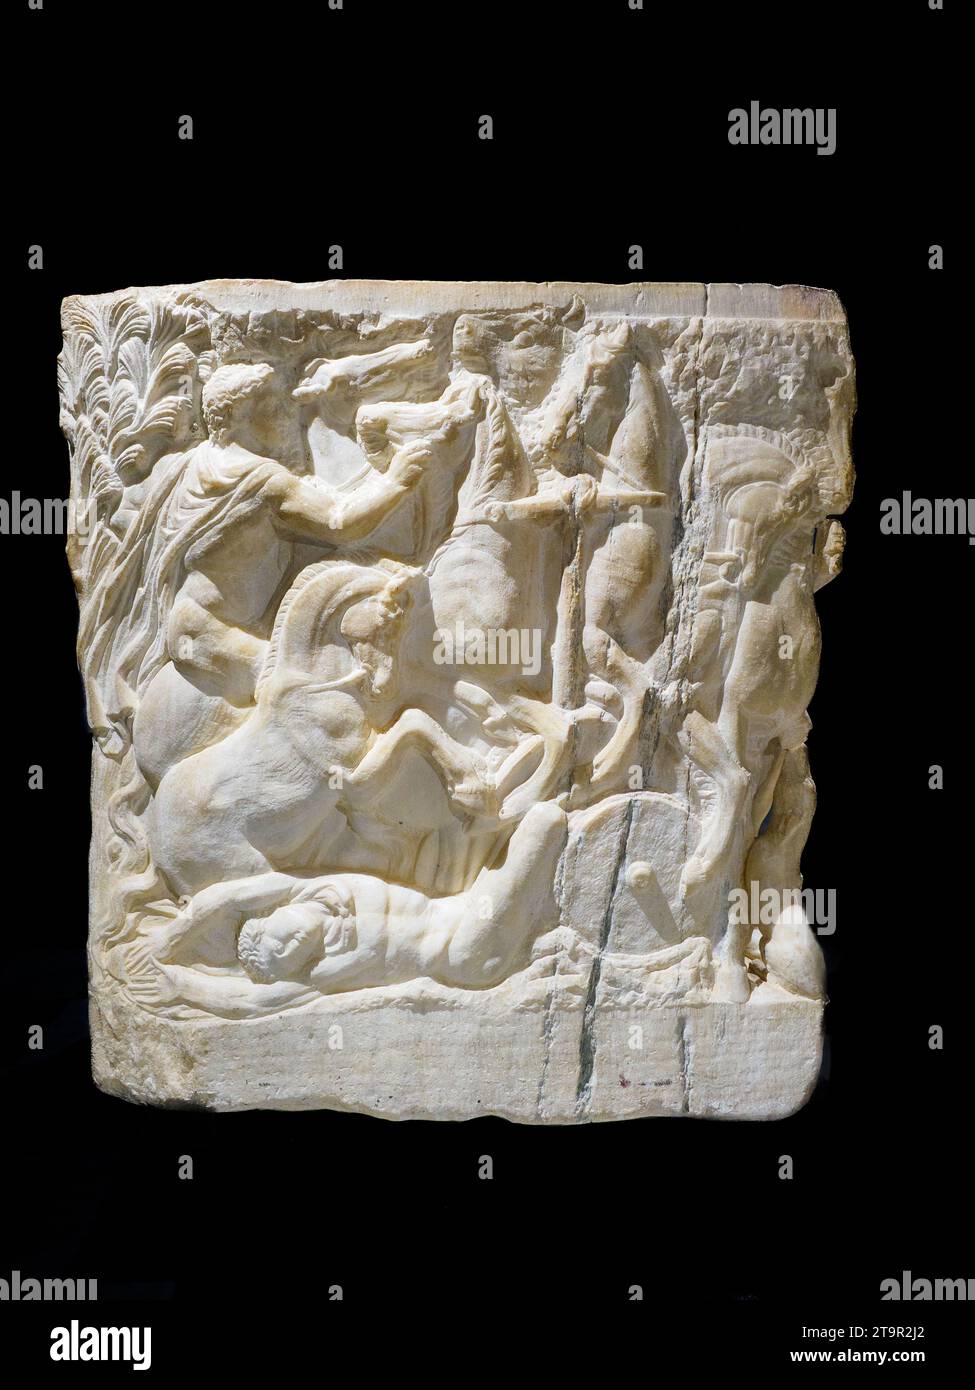 Roman age sarcophagus of Hippolytus and Phaedra. Hippolytus, bottom left, is overwhelmed by the horses of his own quadriga. A companion tries to stop the animals, and among the heads we can glimpse that of the bull sent by Poseidon, the cause of their frenzy. White marble with bluish veins (3rd century BC) - Cattedrale di San Gerlando (Agrigento Cathedral) - Sicily, Italy Stock Photo